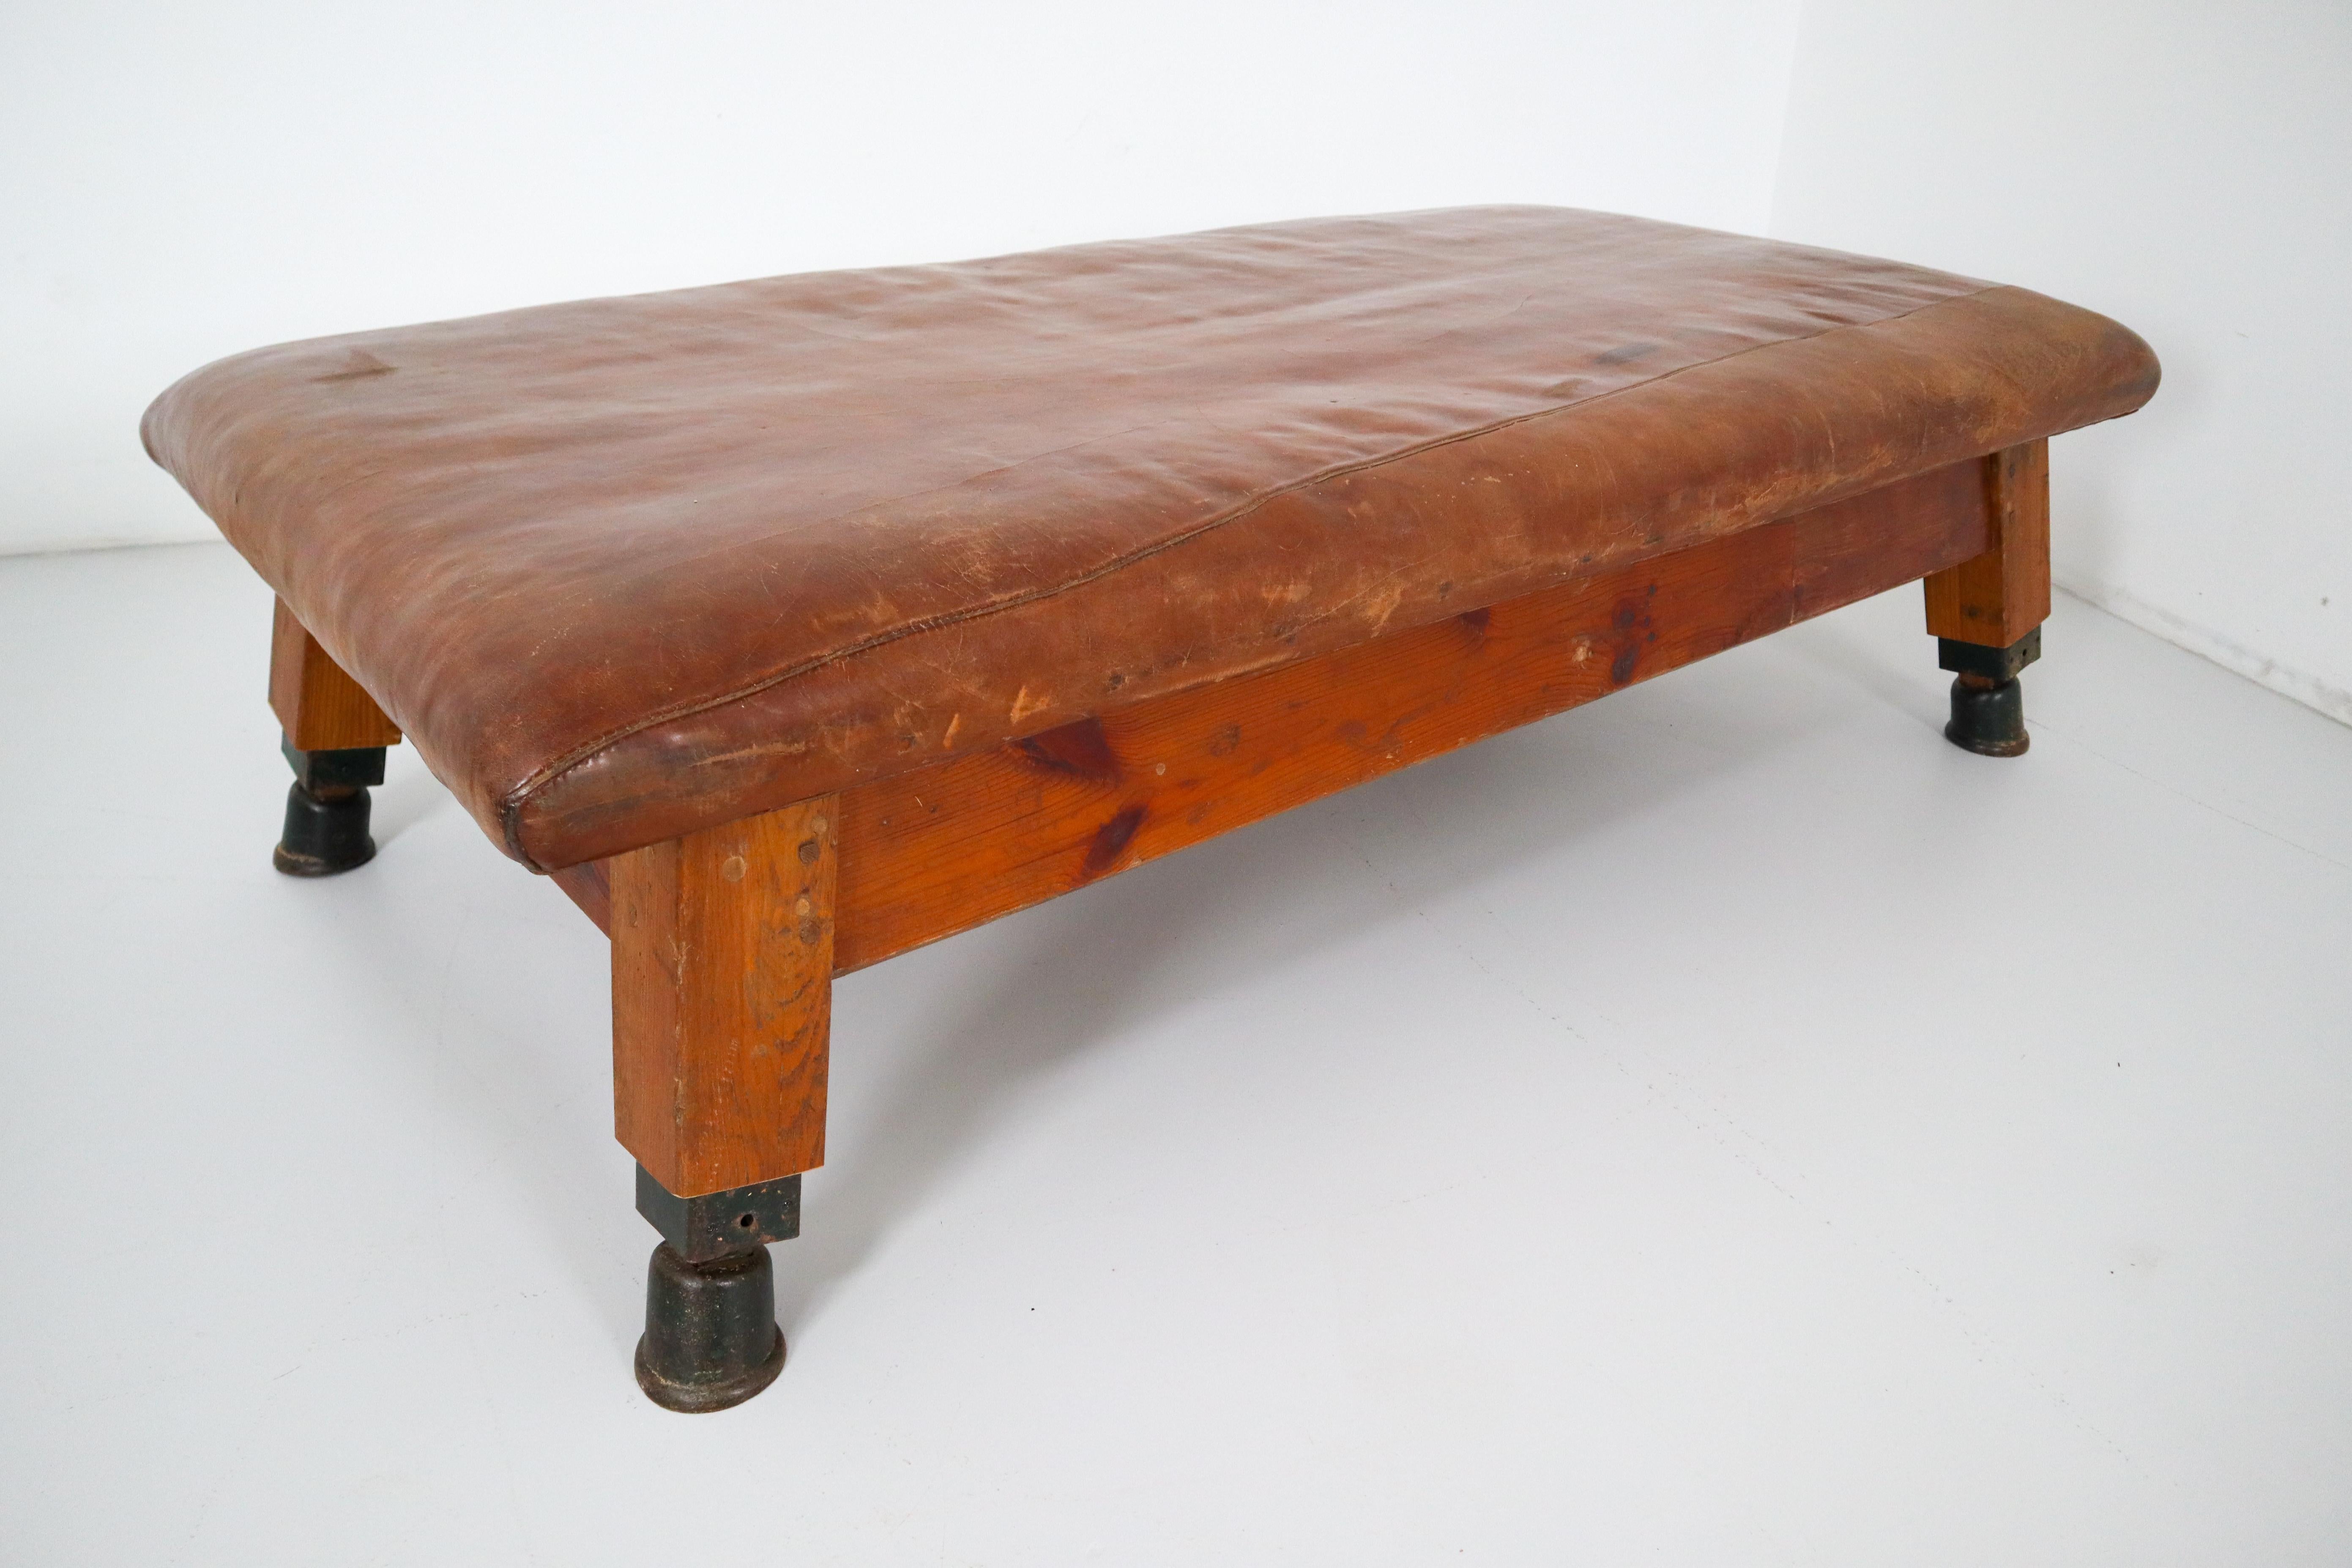 Industrial Vintage Patinated Leather Gym Bench or Table, circa 1940